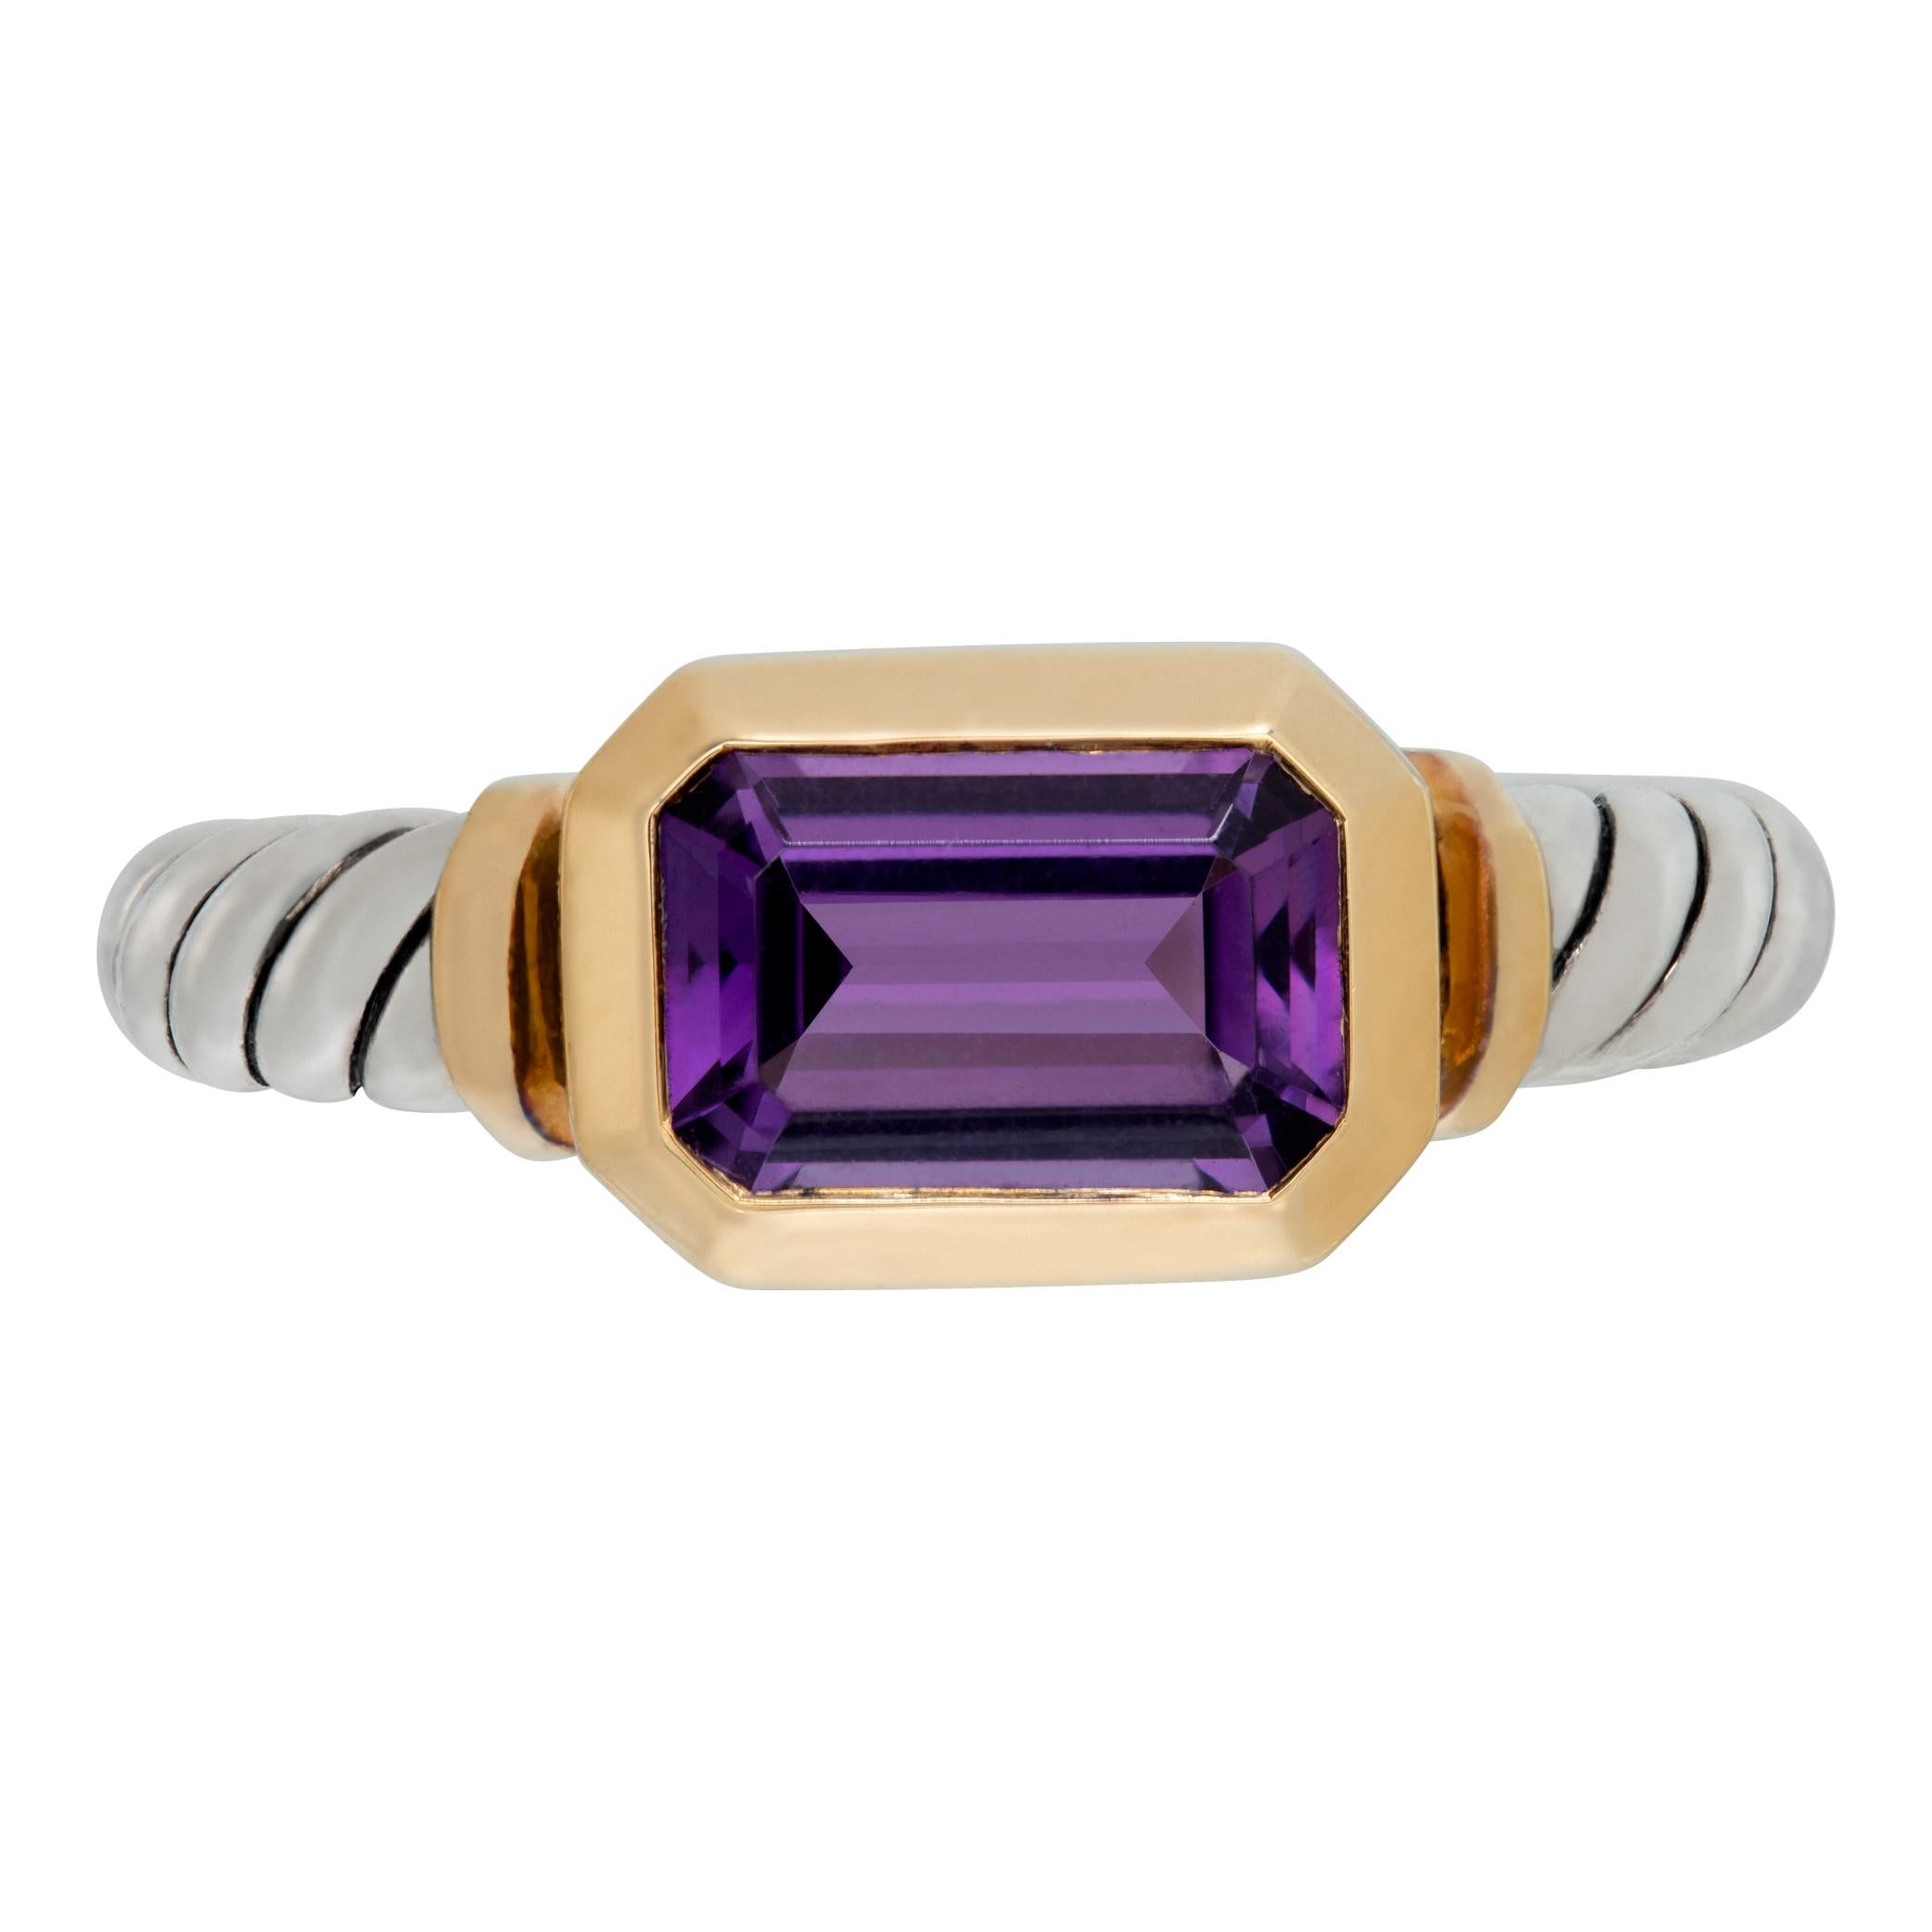 David Yurman Novella ring in 18k & sterling silver with amethyst. Size 4.5.

This David Yurman ring is currently size 7.75 and some items can be sized up or down, please ask! It weighs 4.5 pennyweights and is 18K & STERLING SILVER.